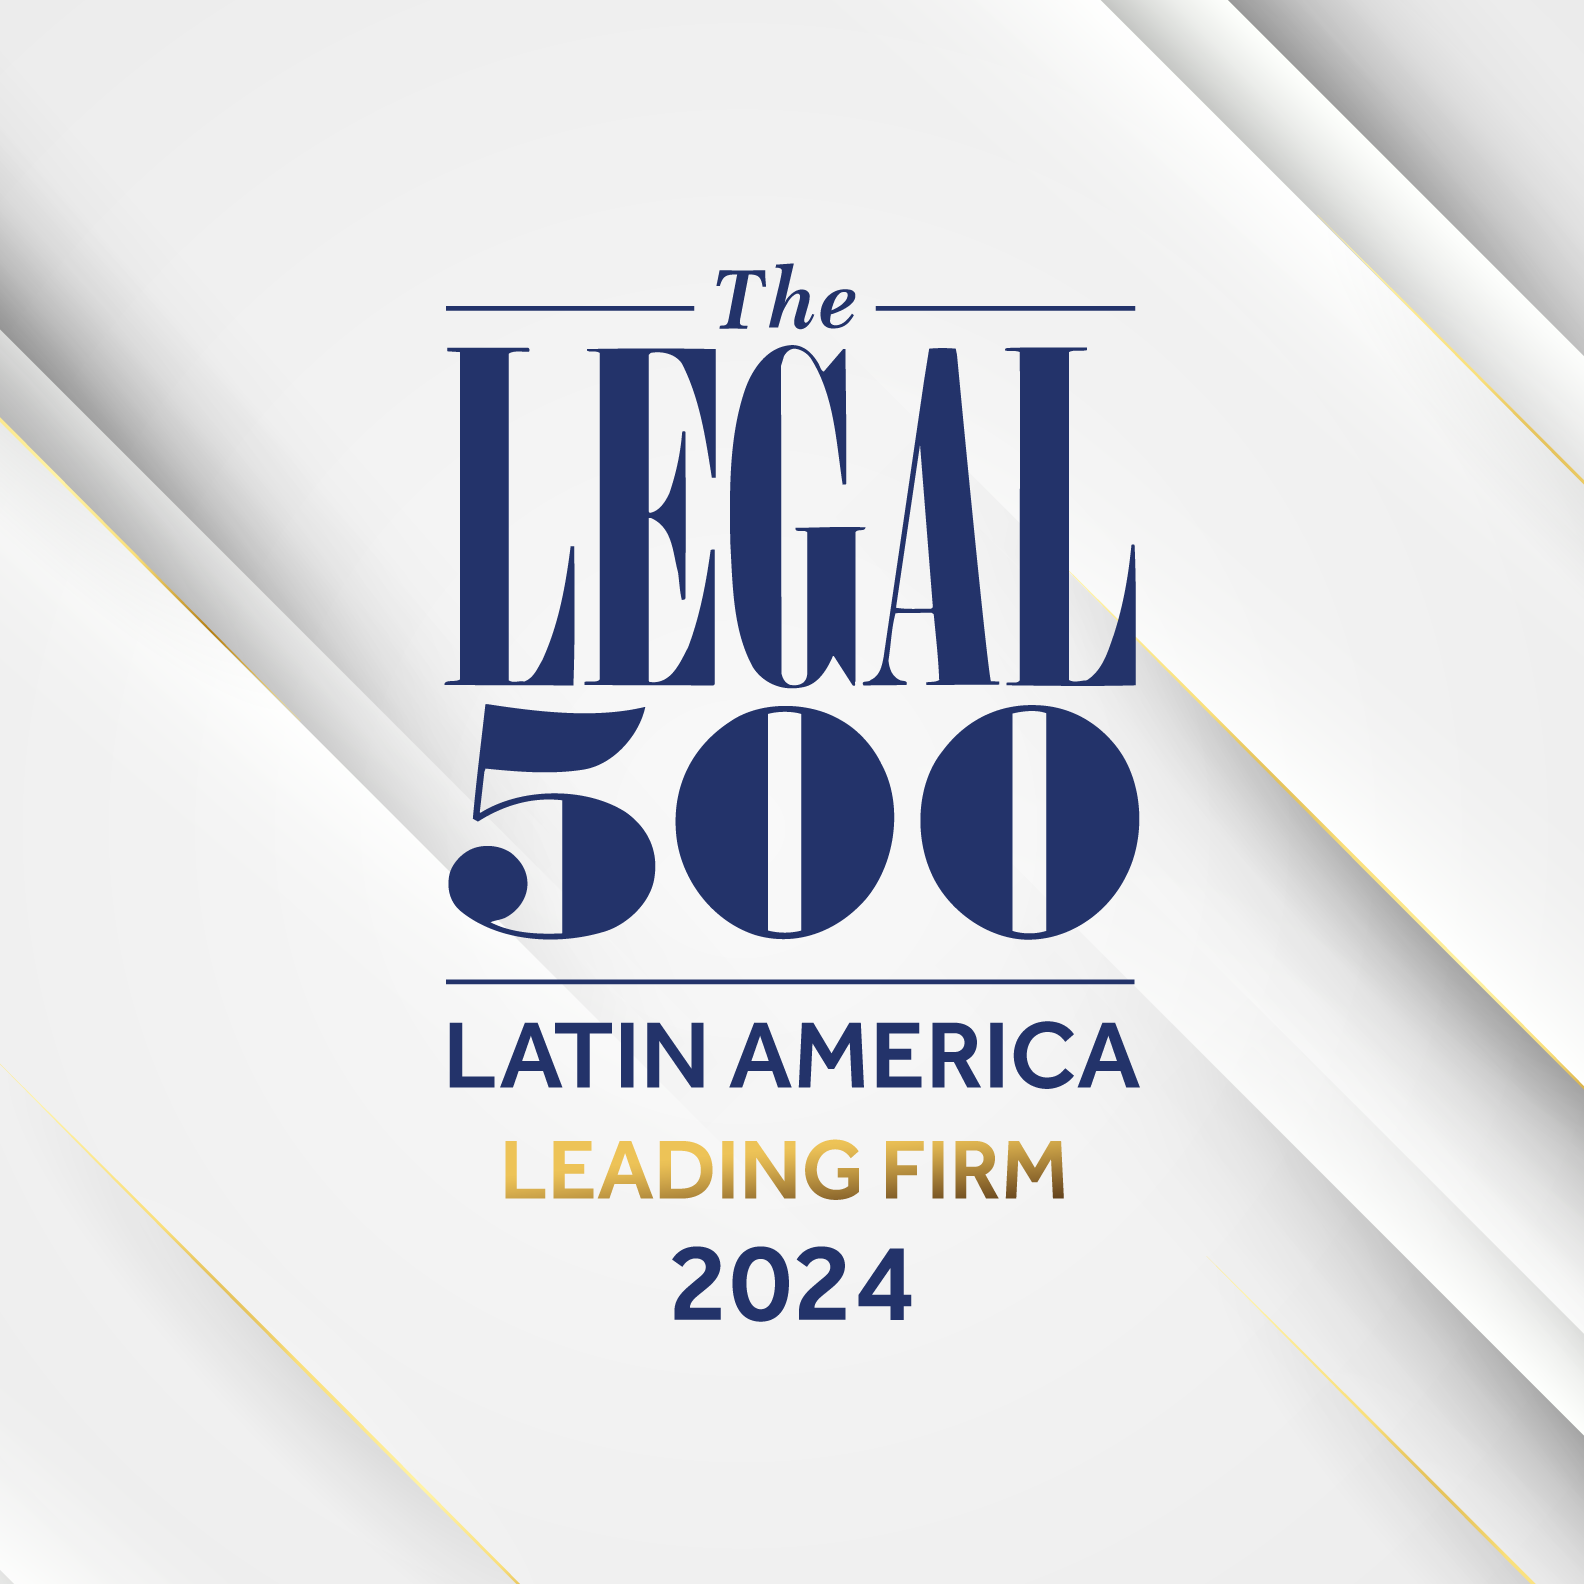 legal-500-leading-firm